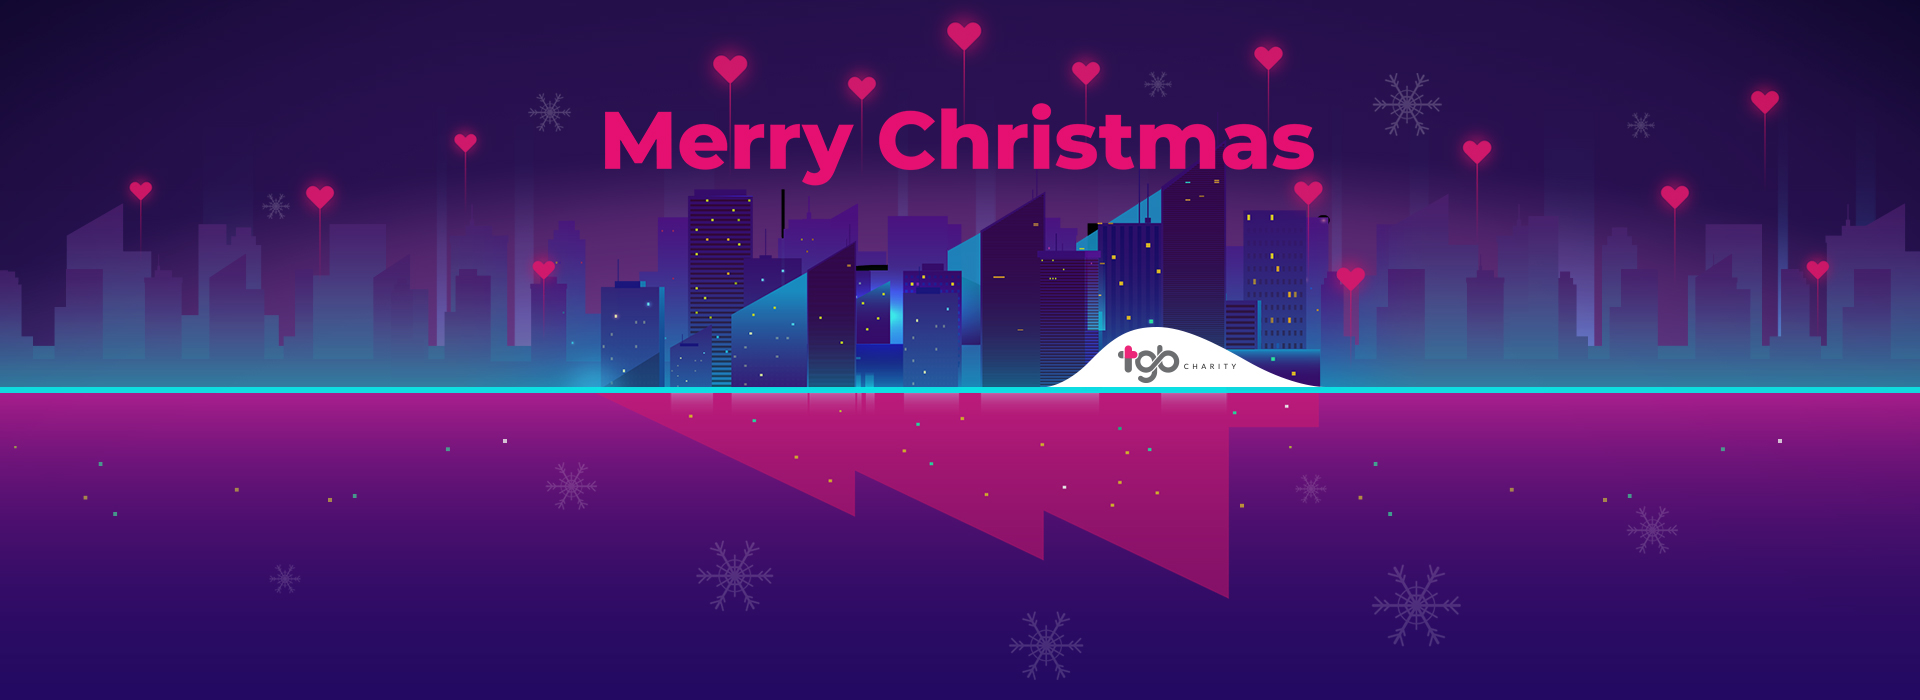 Warm Christmas Greetings from TGB Charity & Our Partners